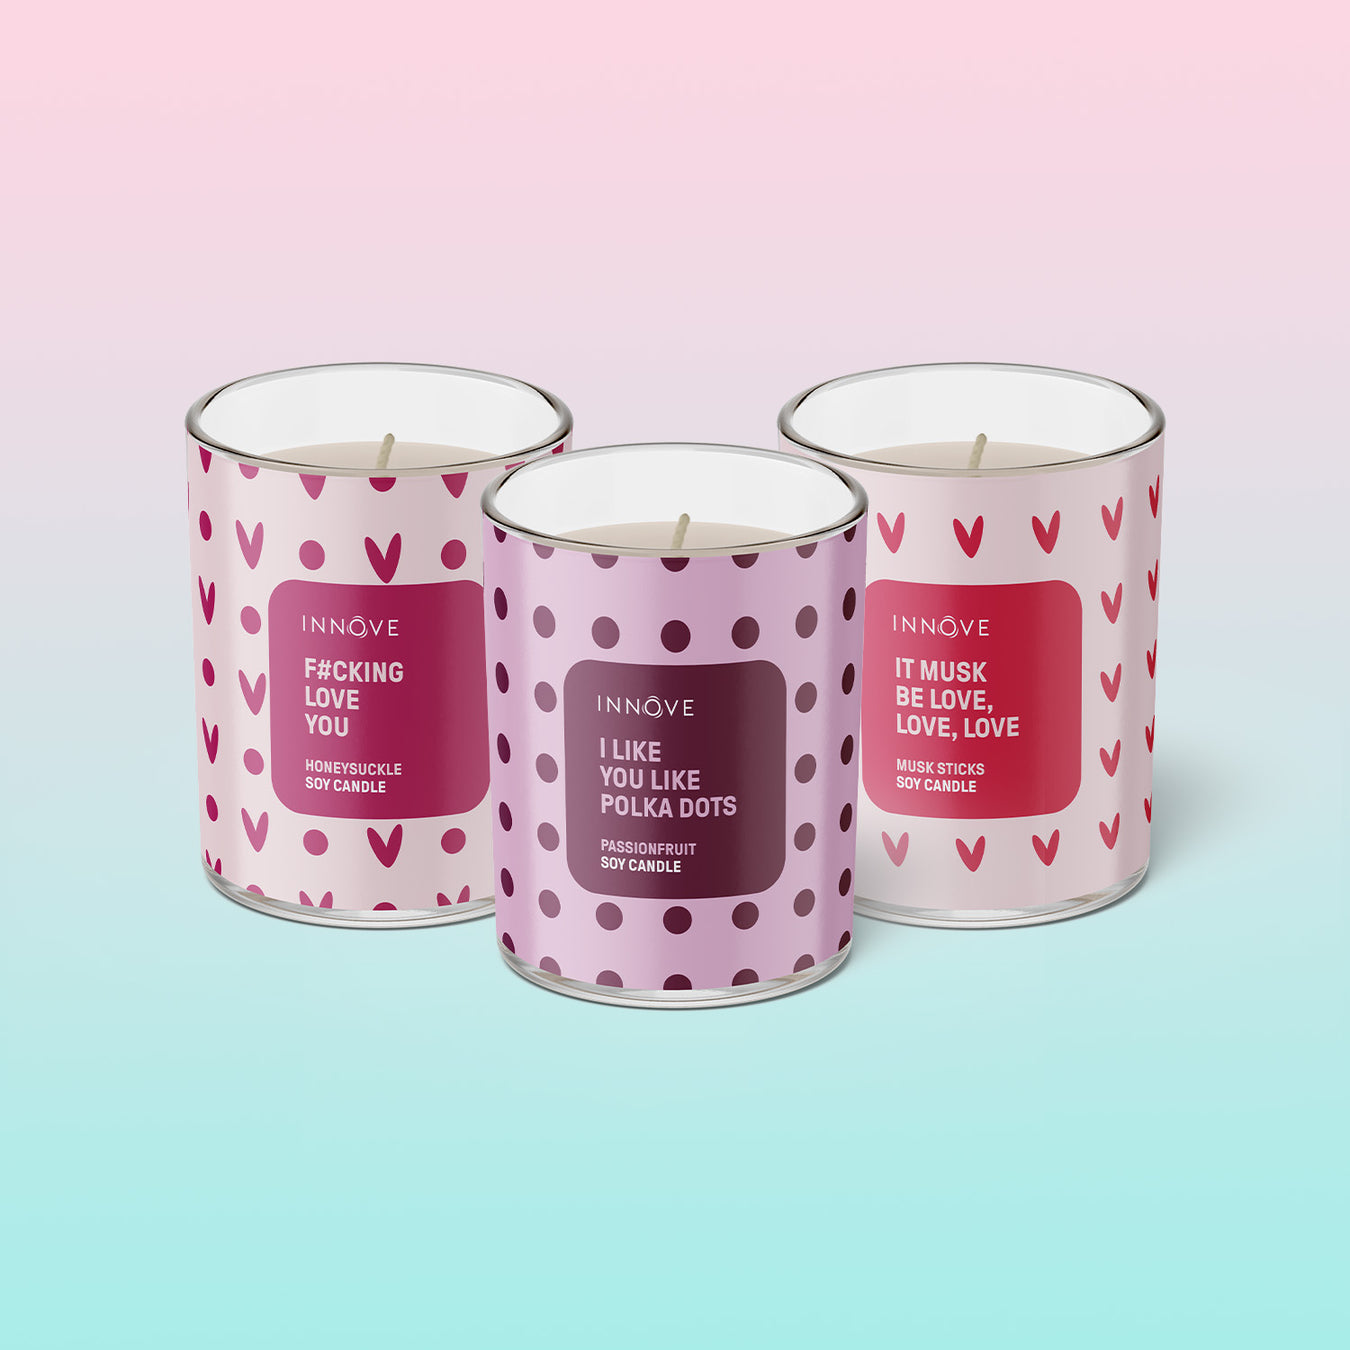 The Love Candles